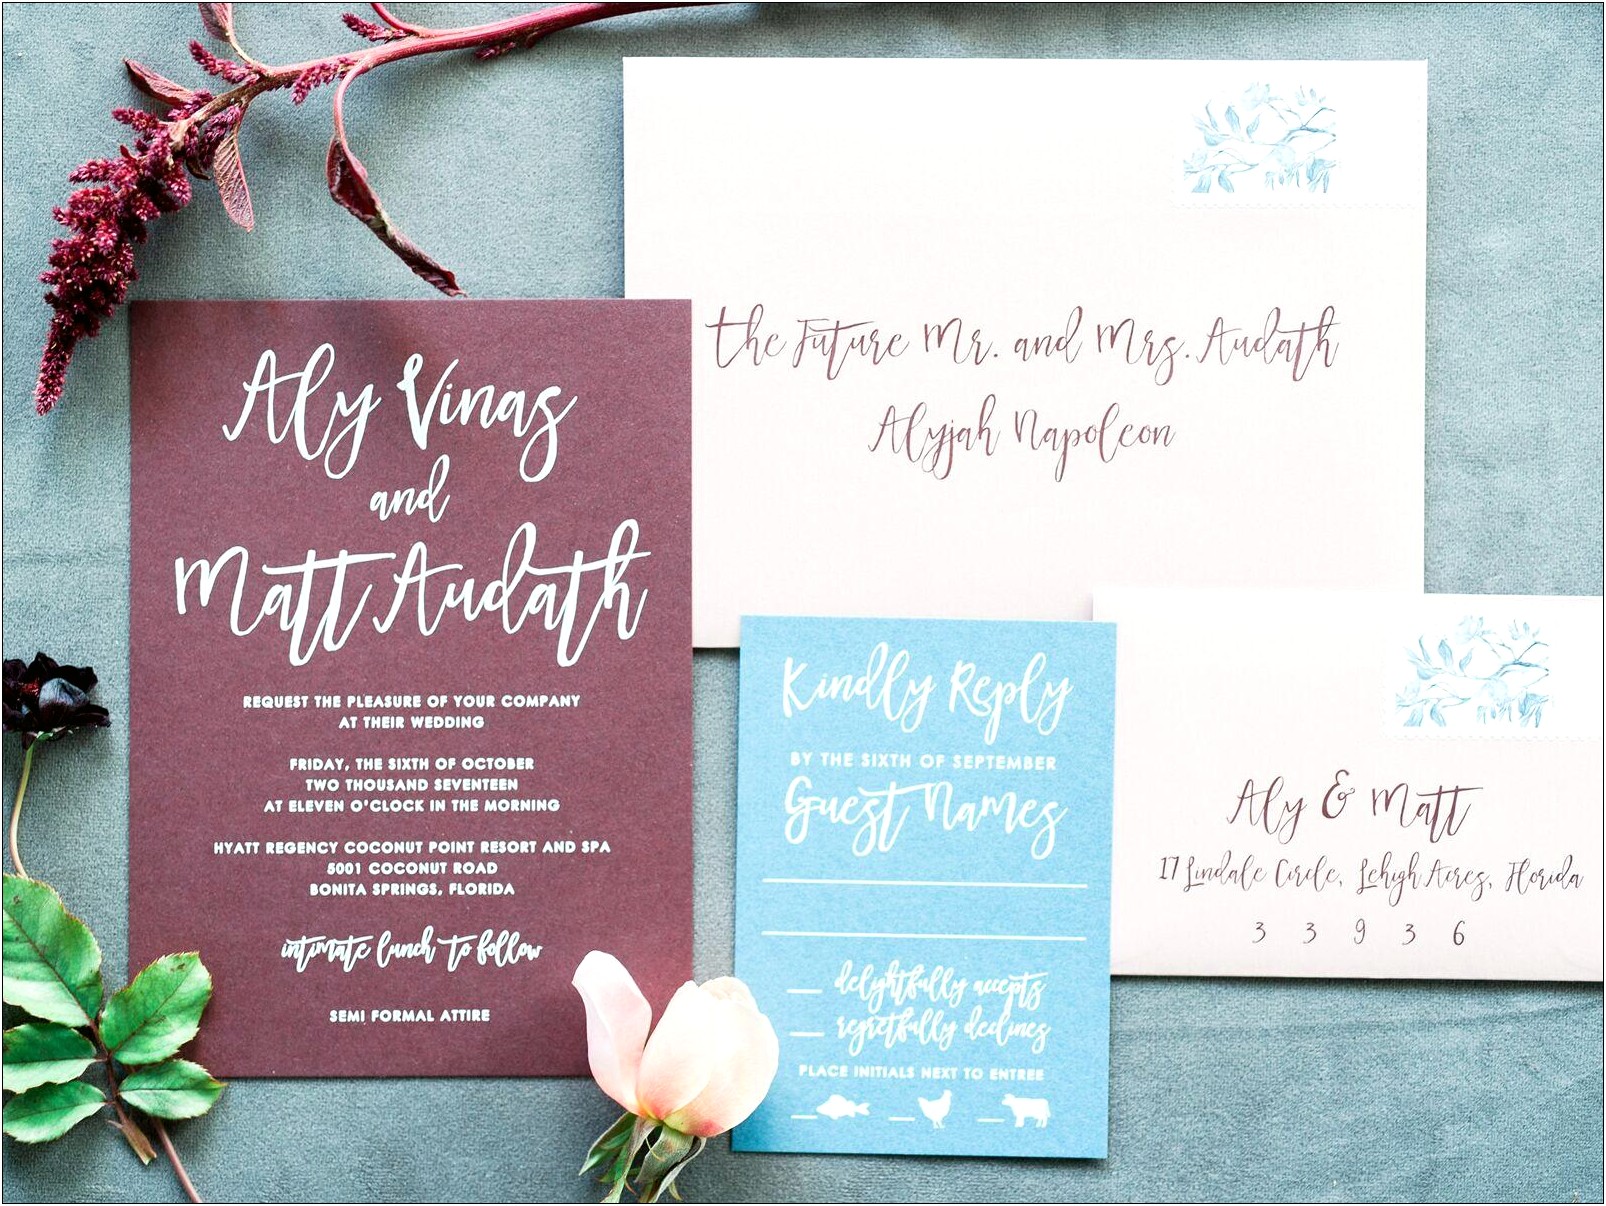 Can You Address Wedding Invitations With Last Name